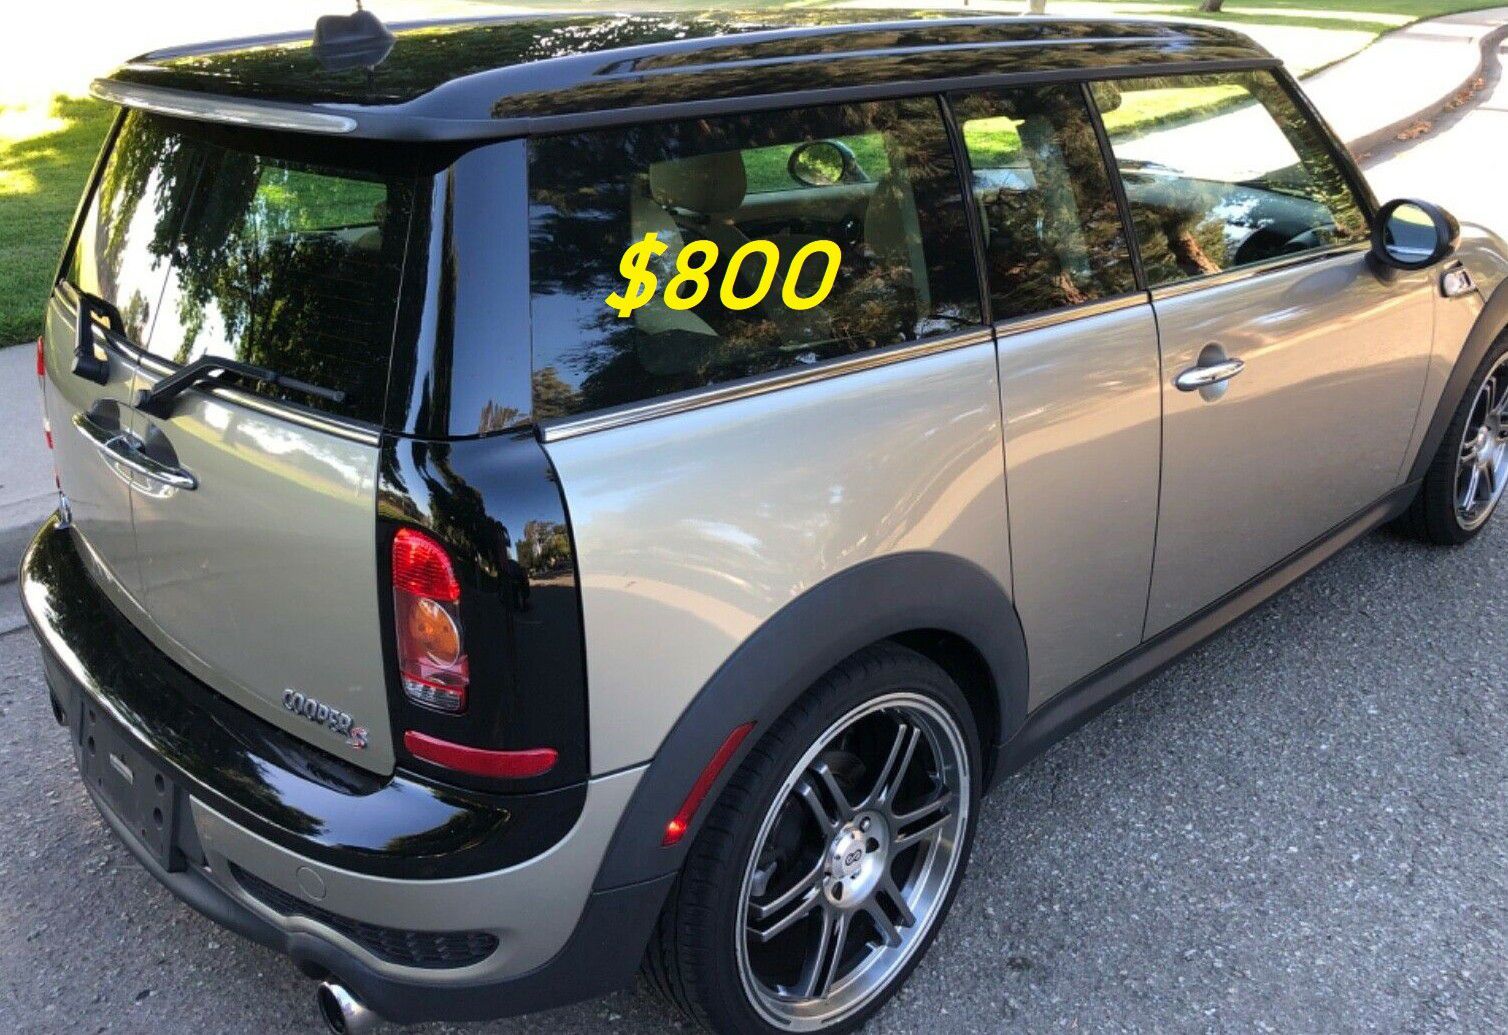 ❇️URGENT $8OO I am the first owner and I want to sell a 2009 Mini cooper Runs and drive strong!,,.,,., ❇️